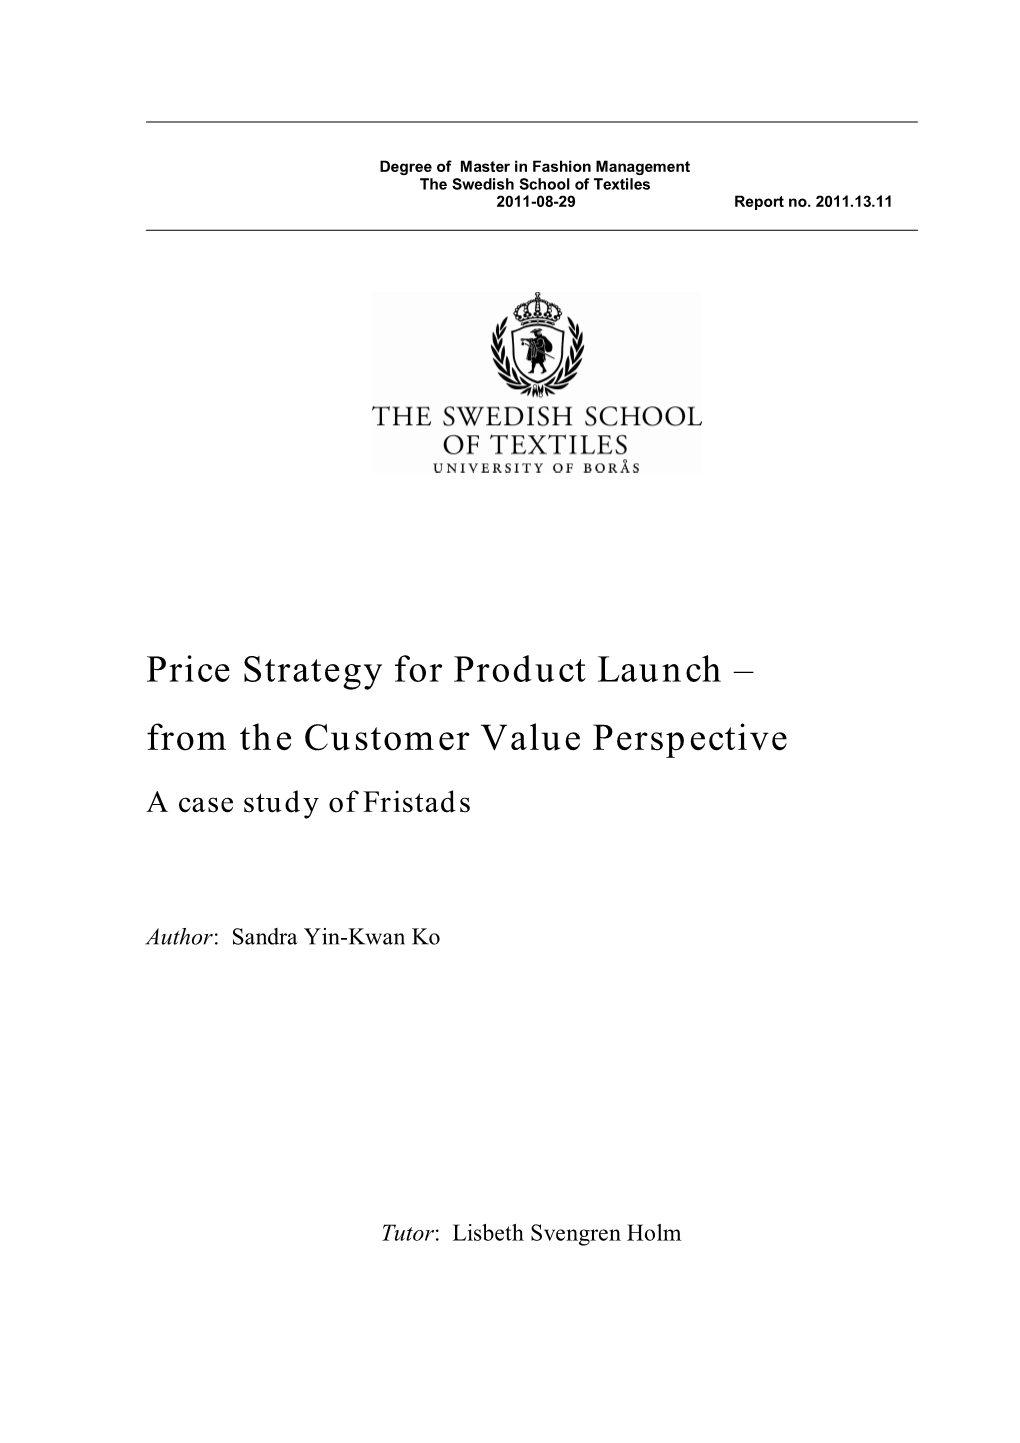 Price Strategy for Product Launch – from the Customer Value Perspective a Case Study of Fristads